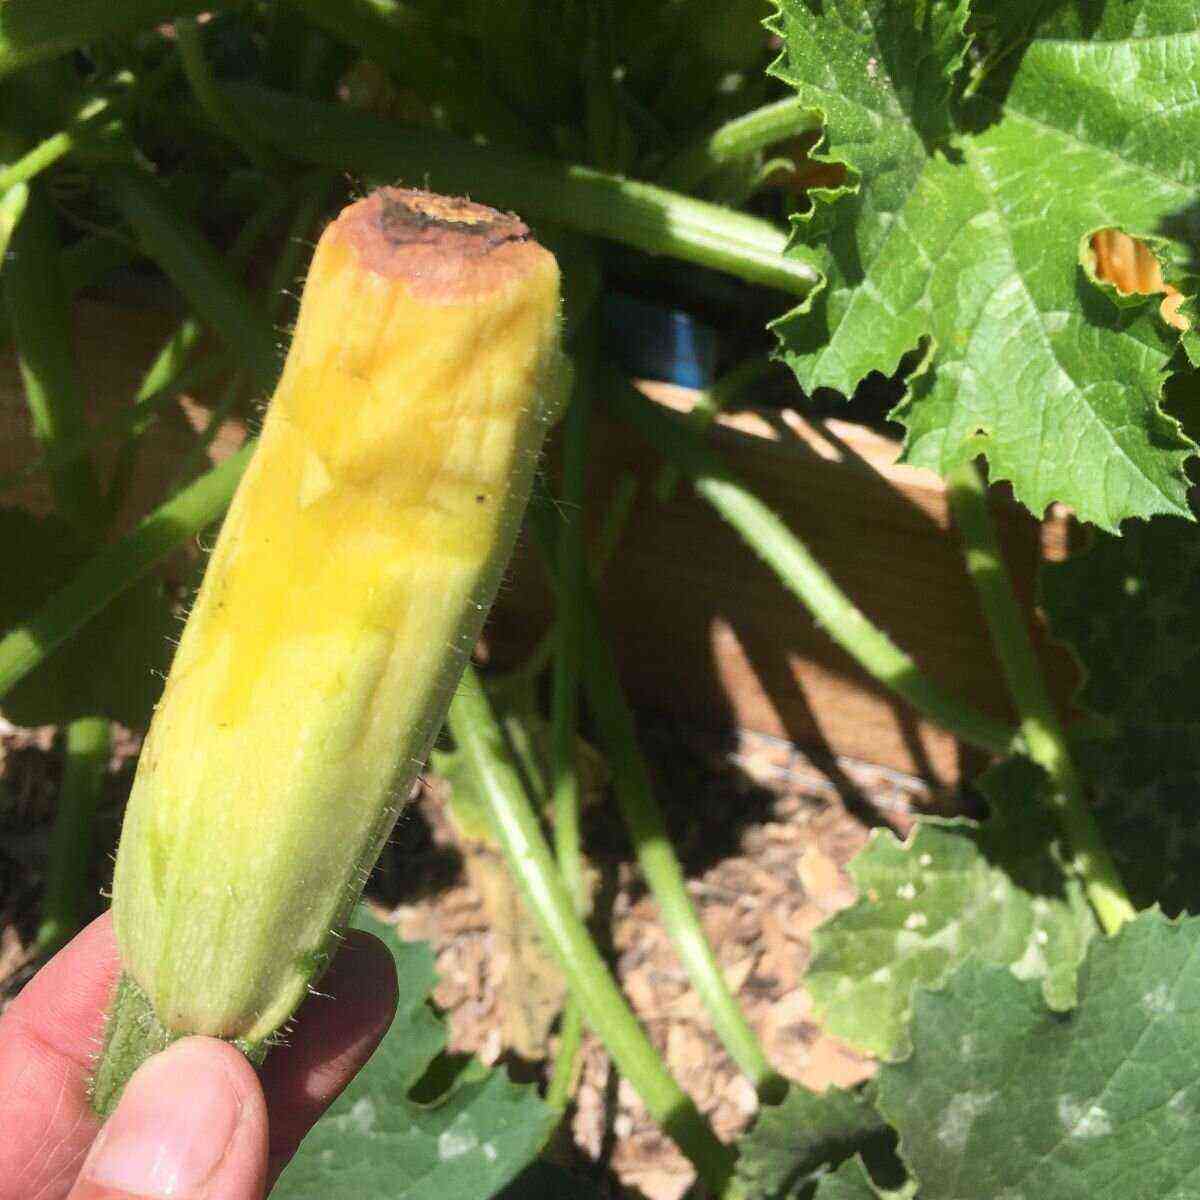 Why ovaries of zucchini rot and what to do?